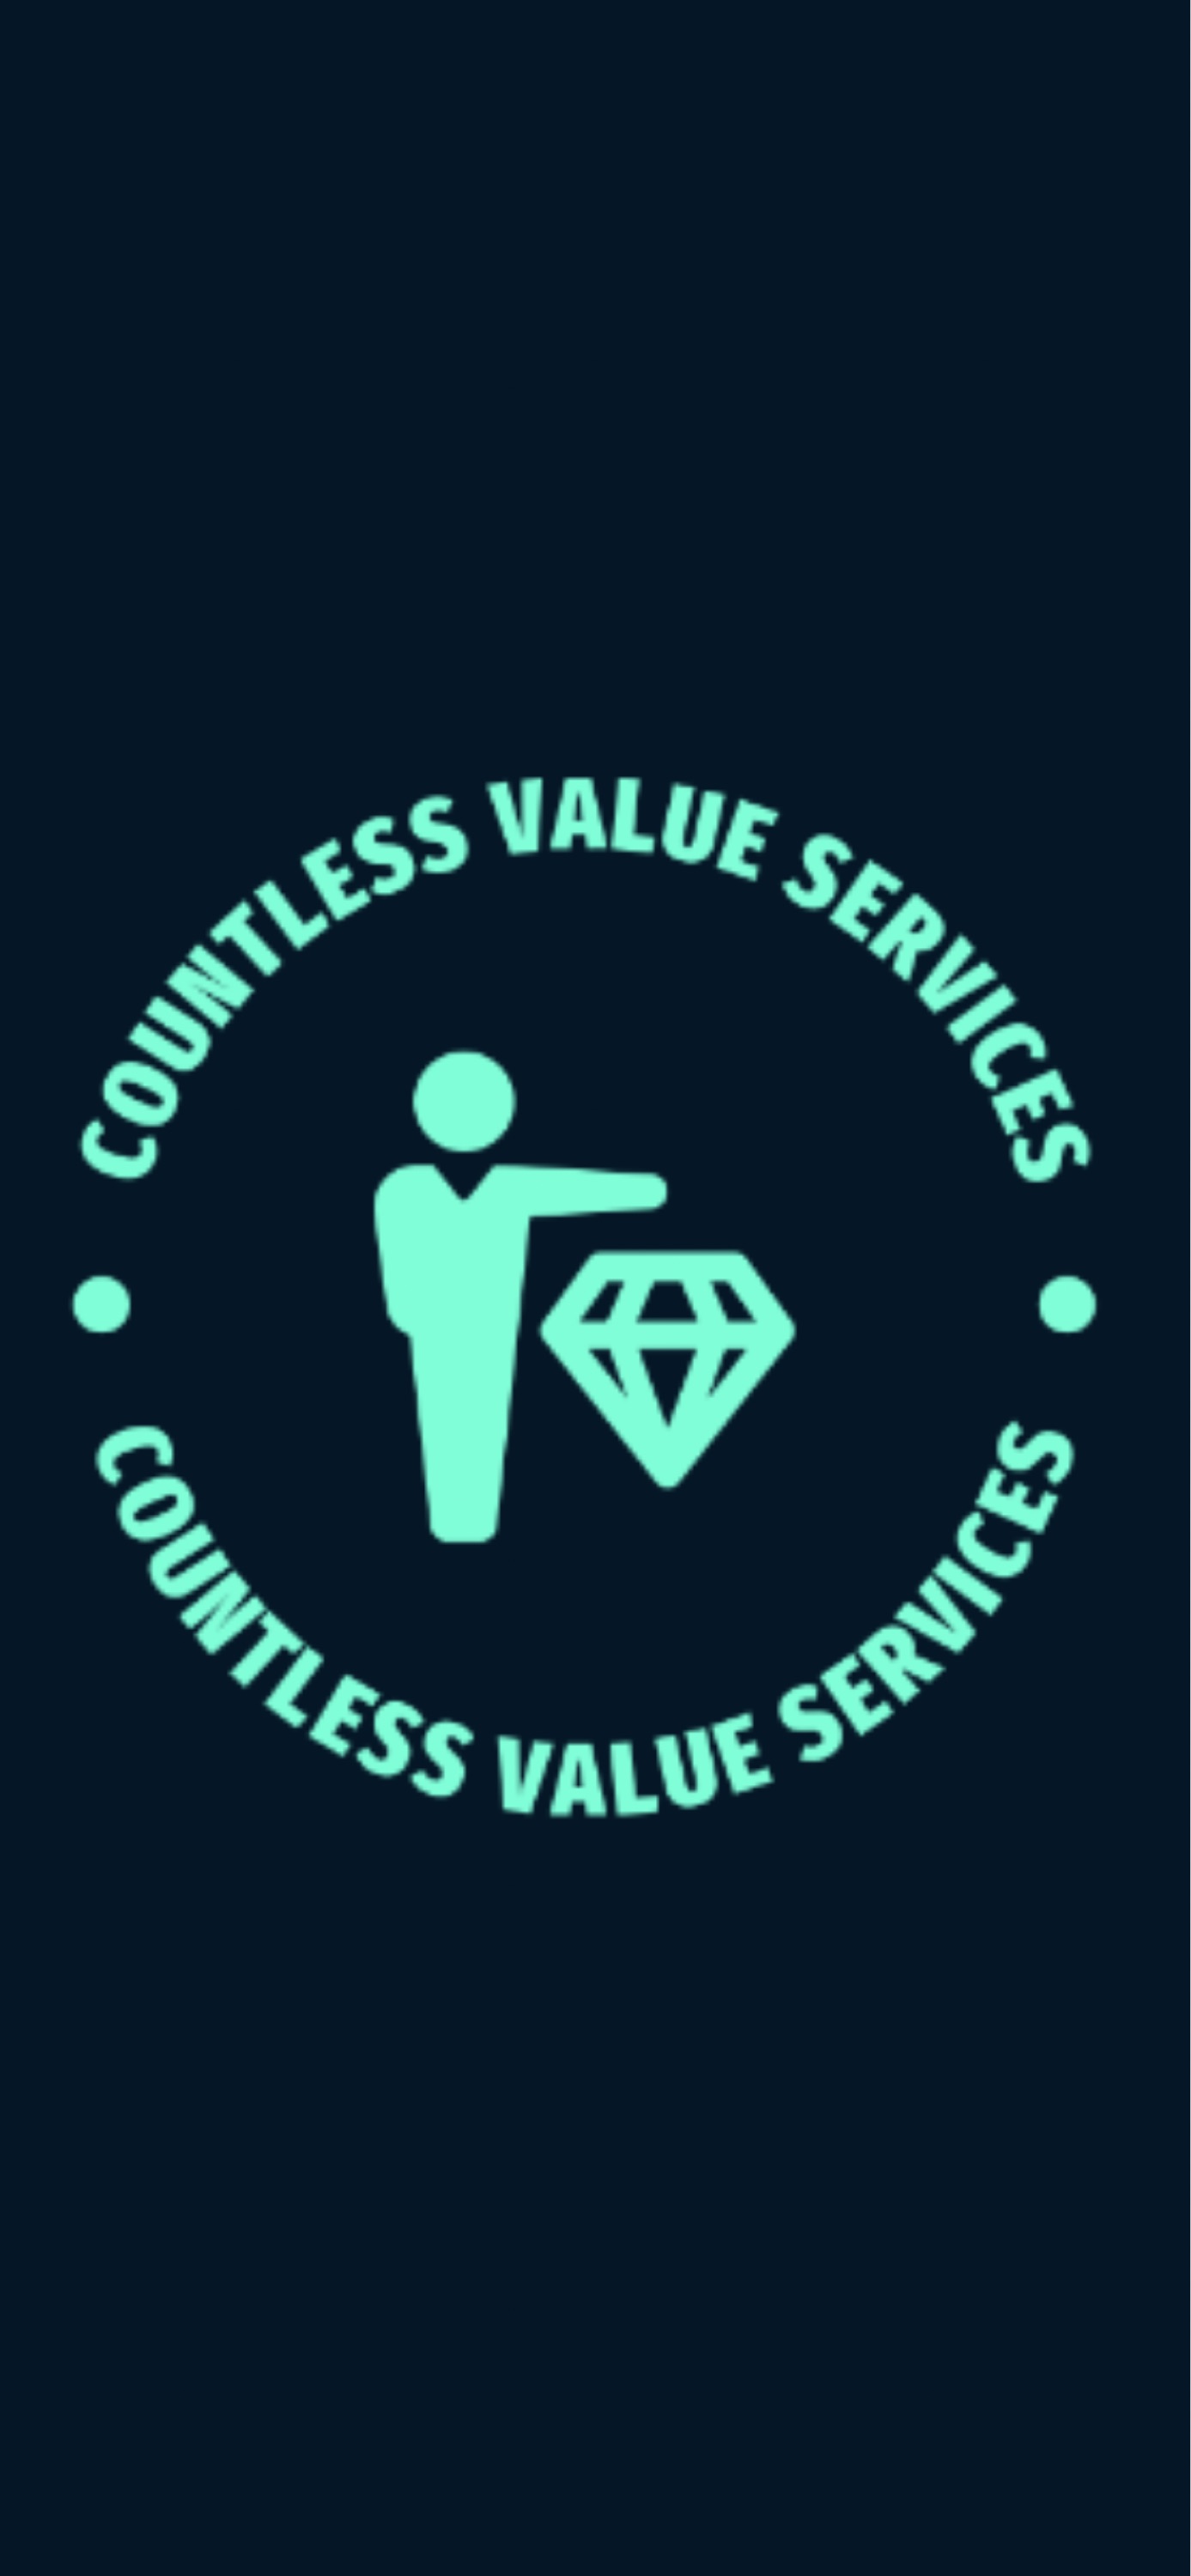 Countless Value Logo